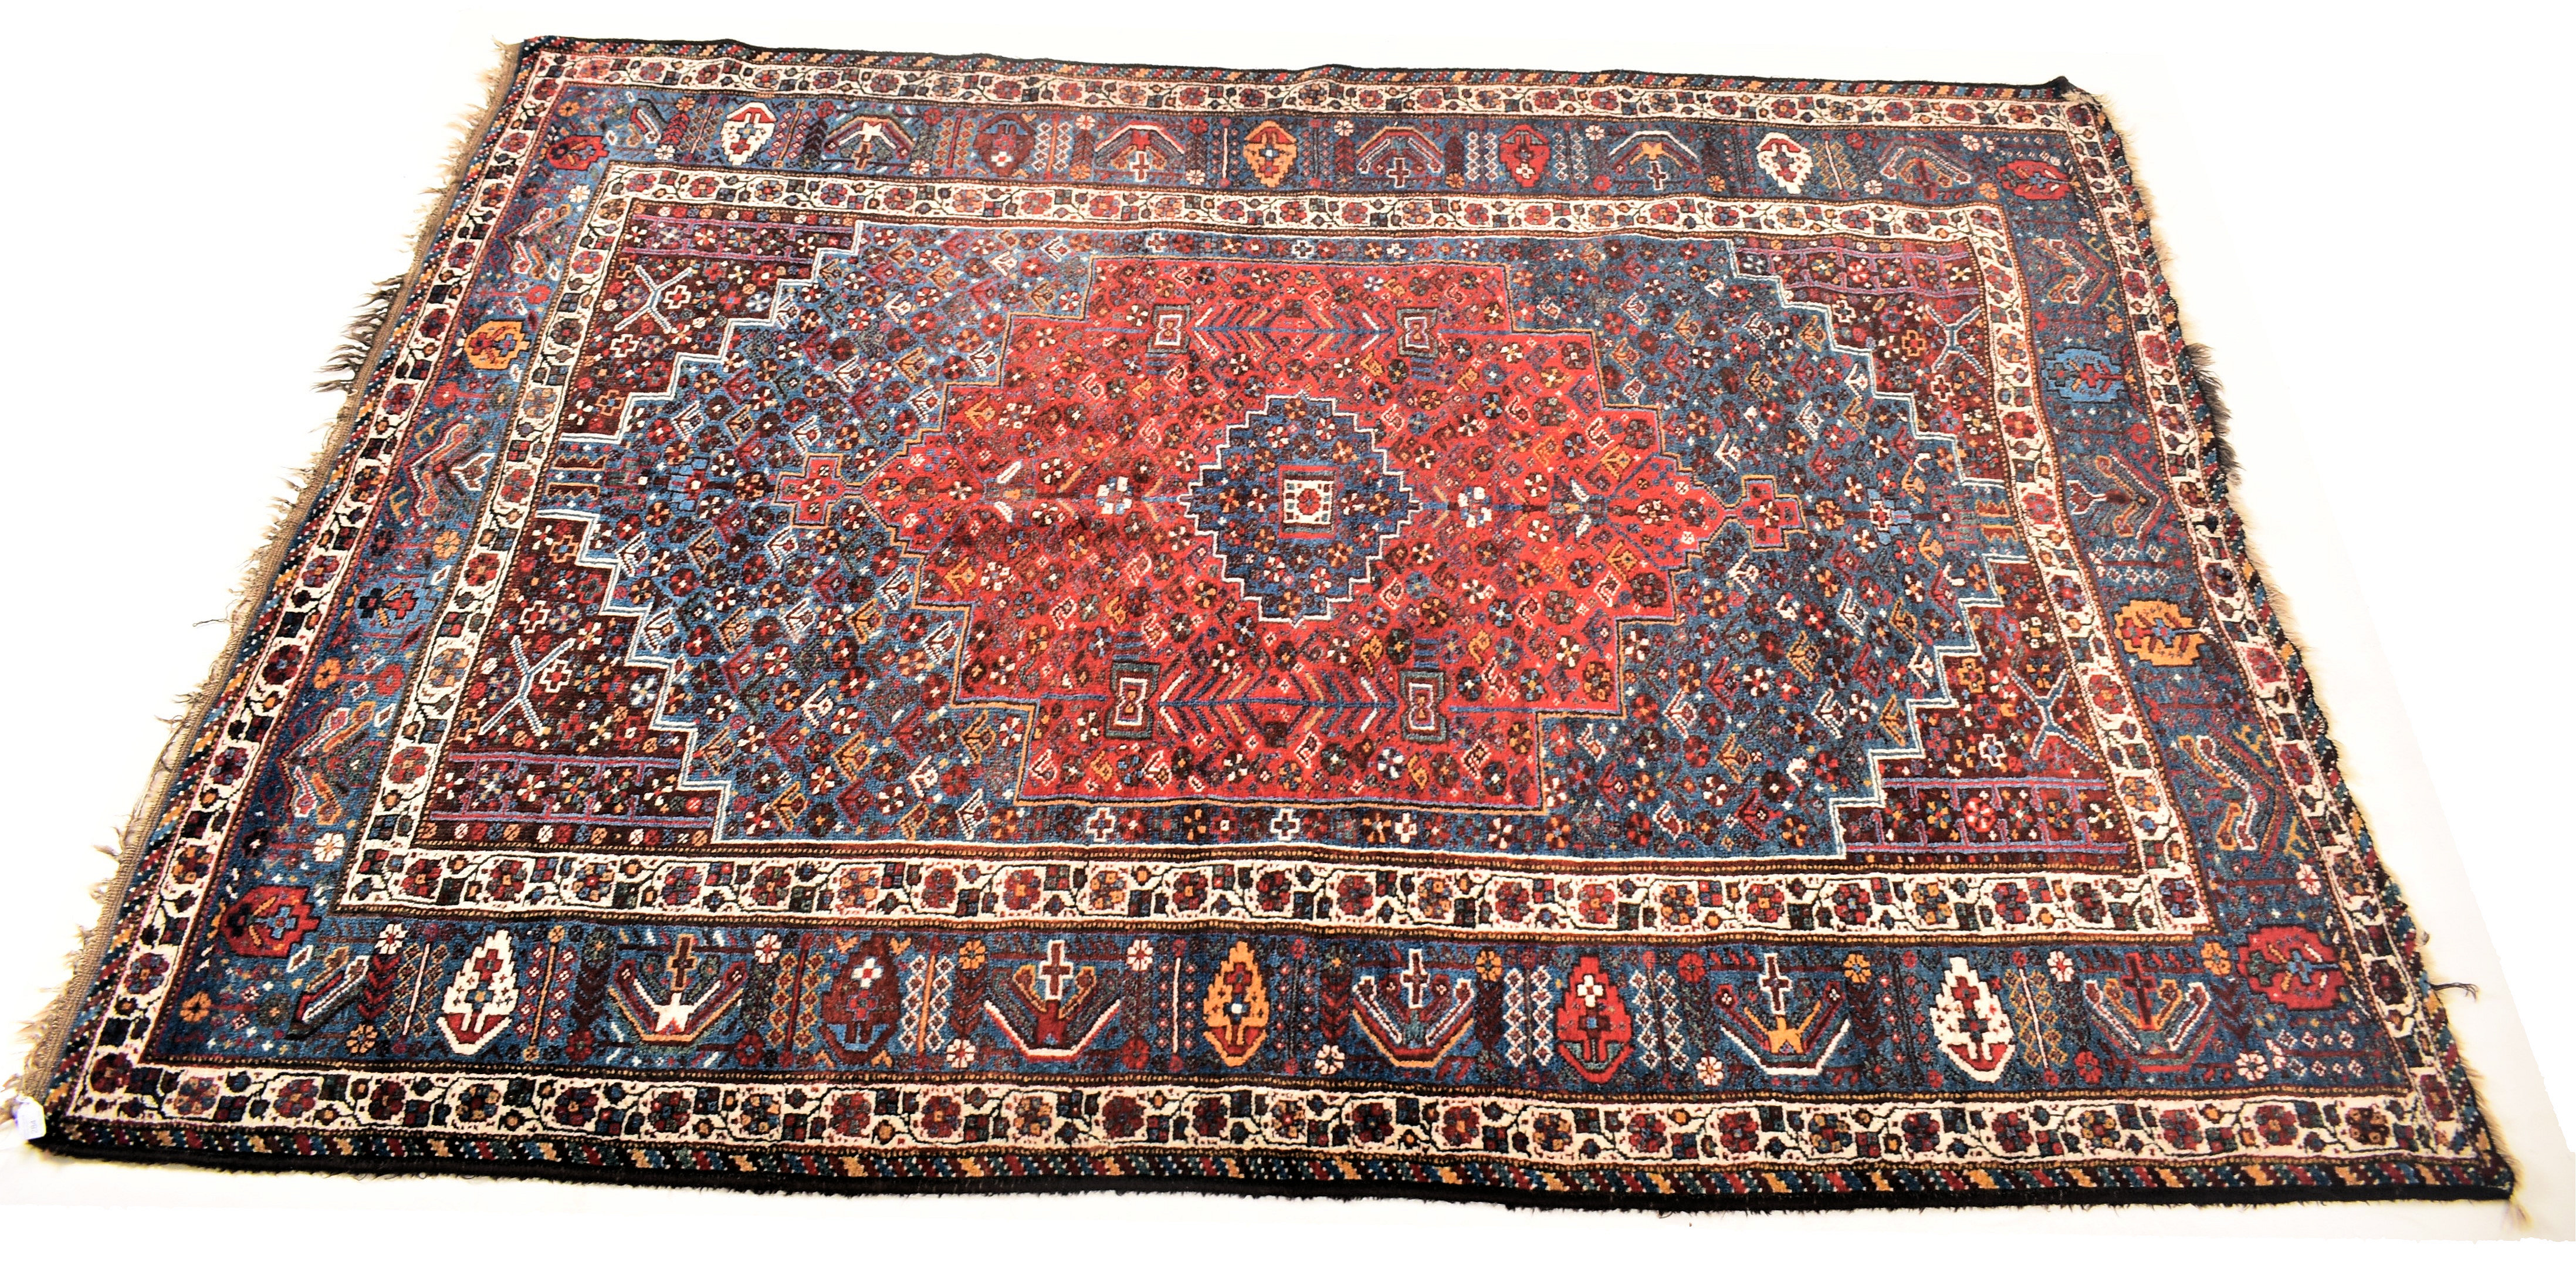 LARGE 20TH CENTURY AZERI PERSIAN HAND KNOTTED RUG